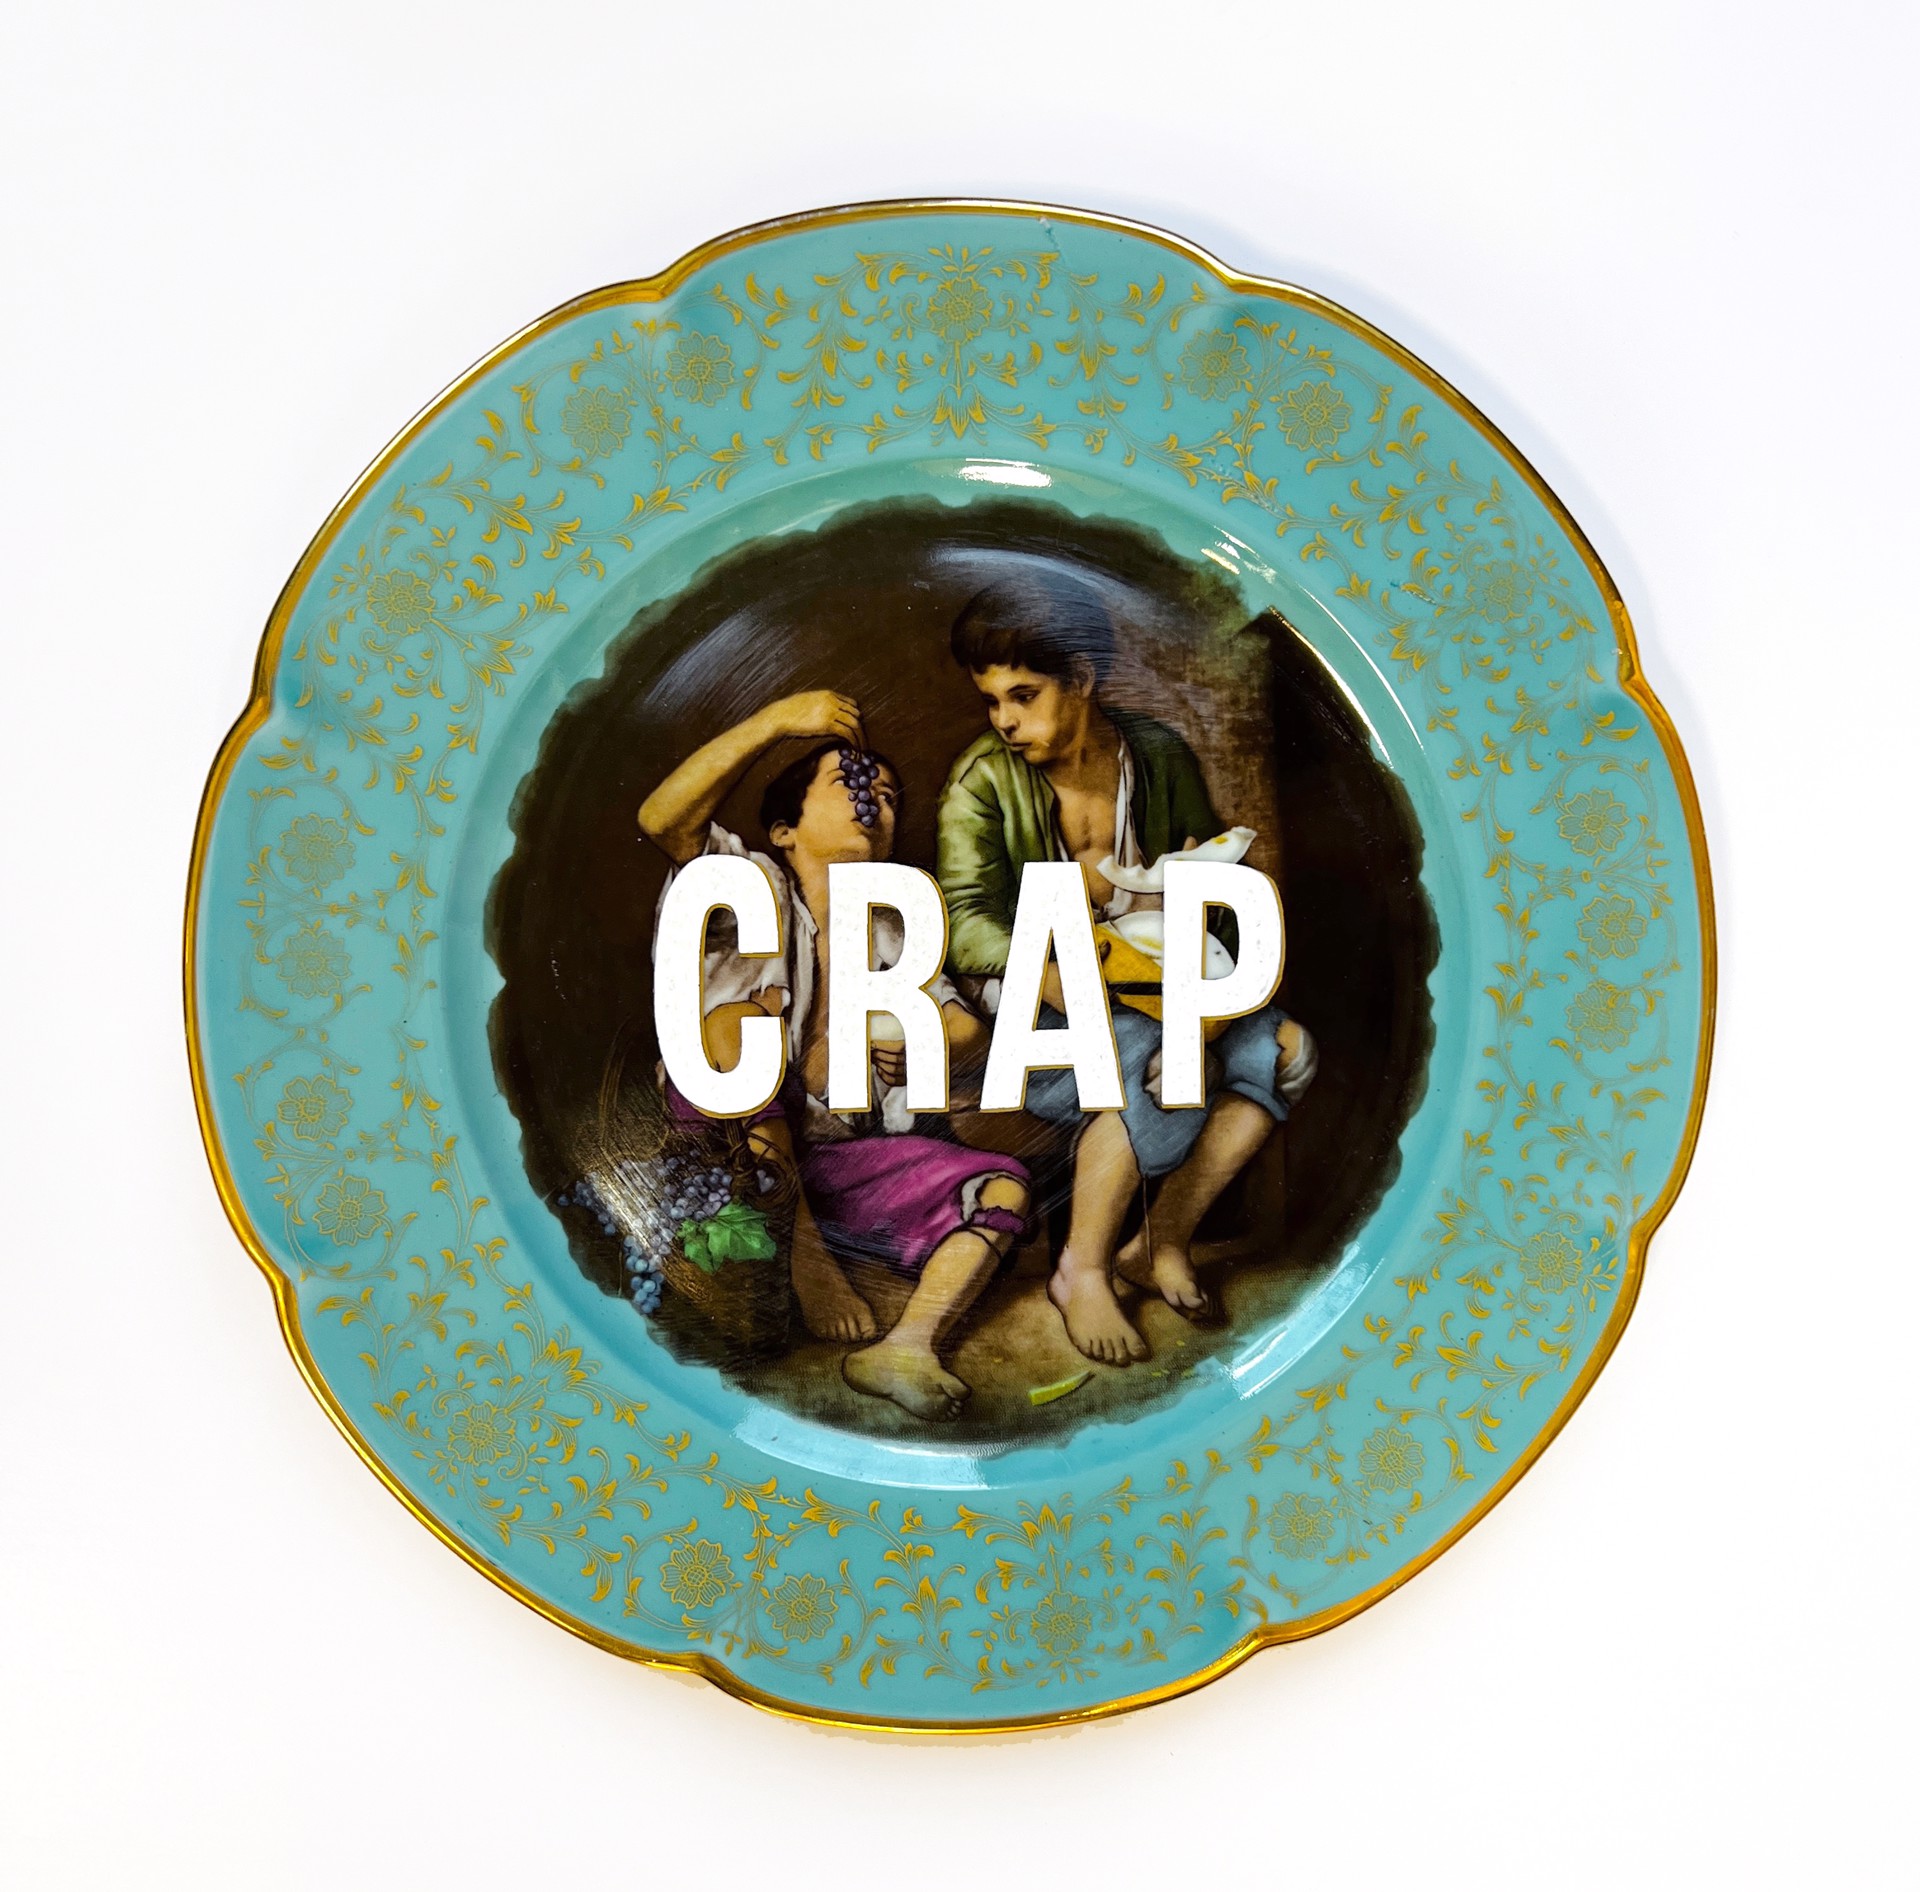 Crap (dinner plate) by Marie-Claude Marquis